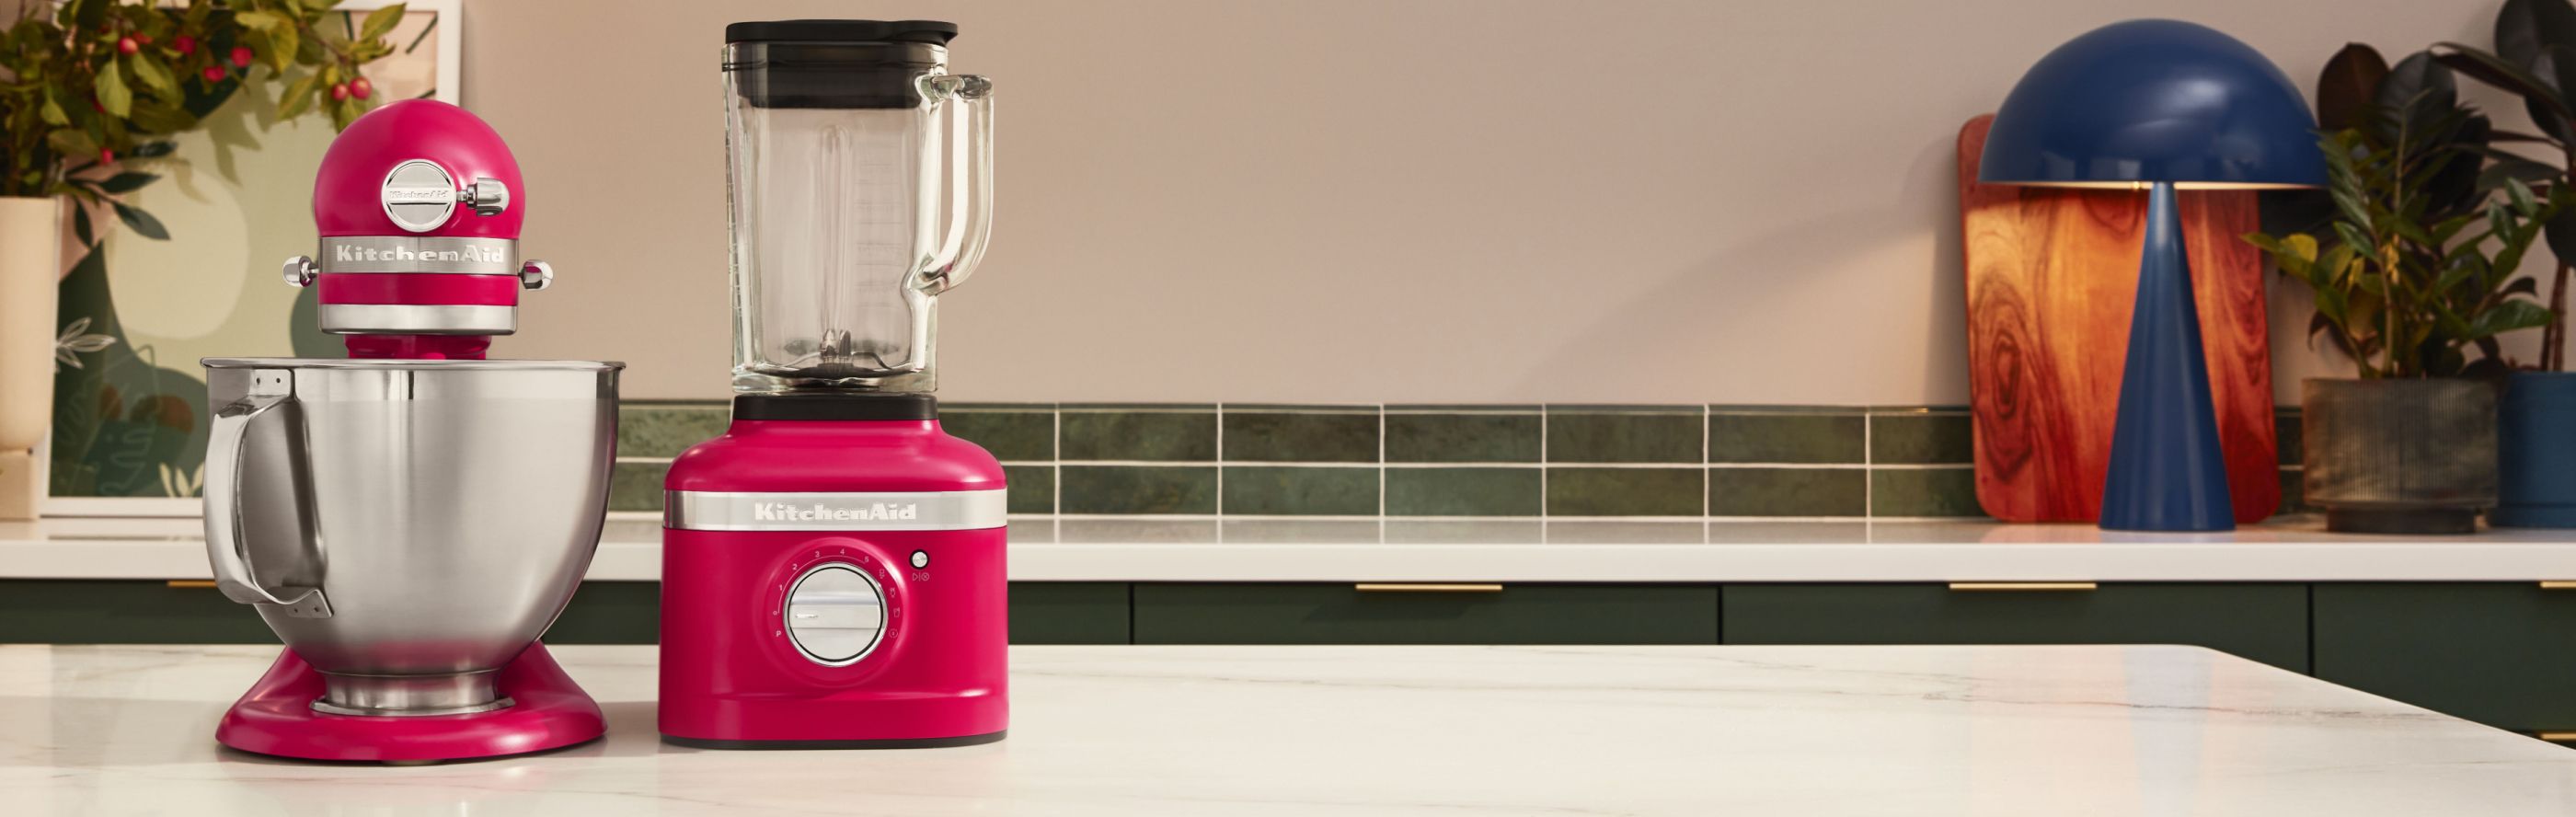 The KitchenAid® Color of the Year Blender and Stand Mixer on a countertop.